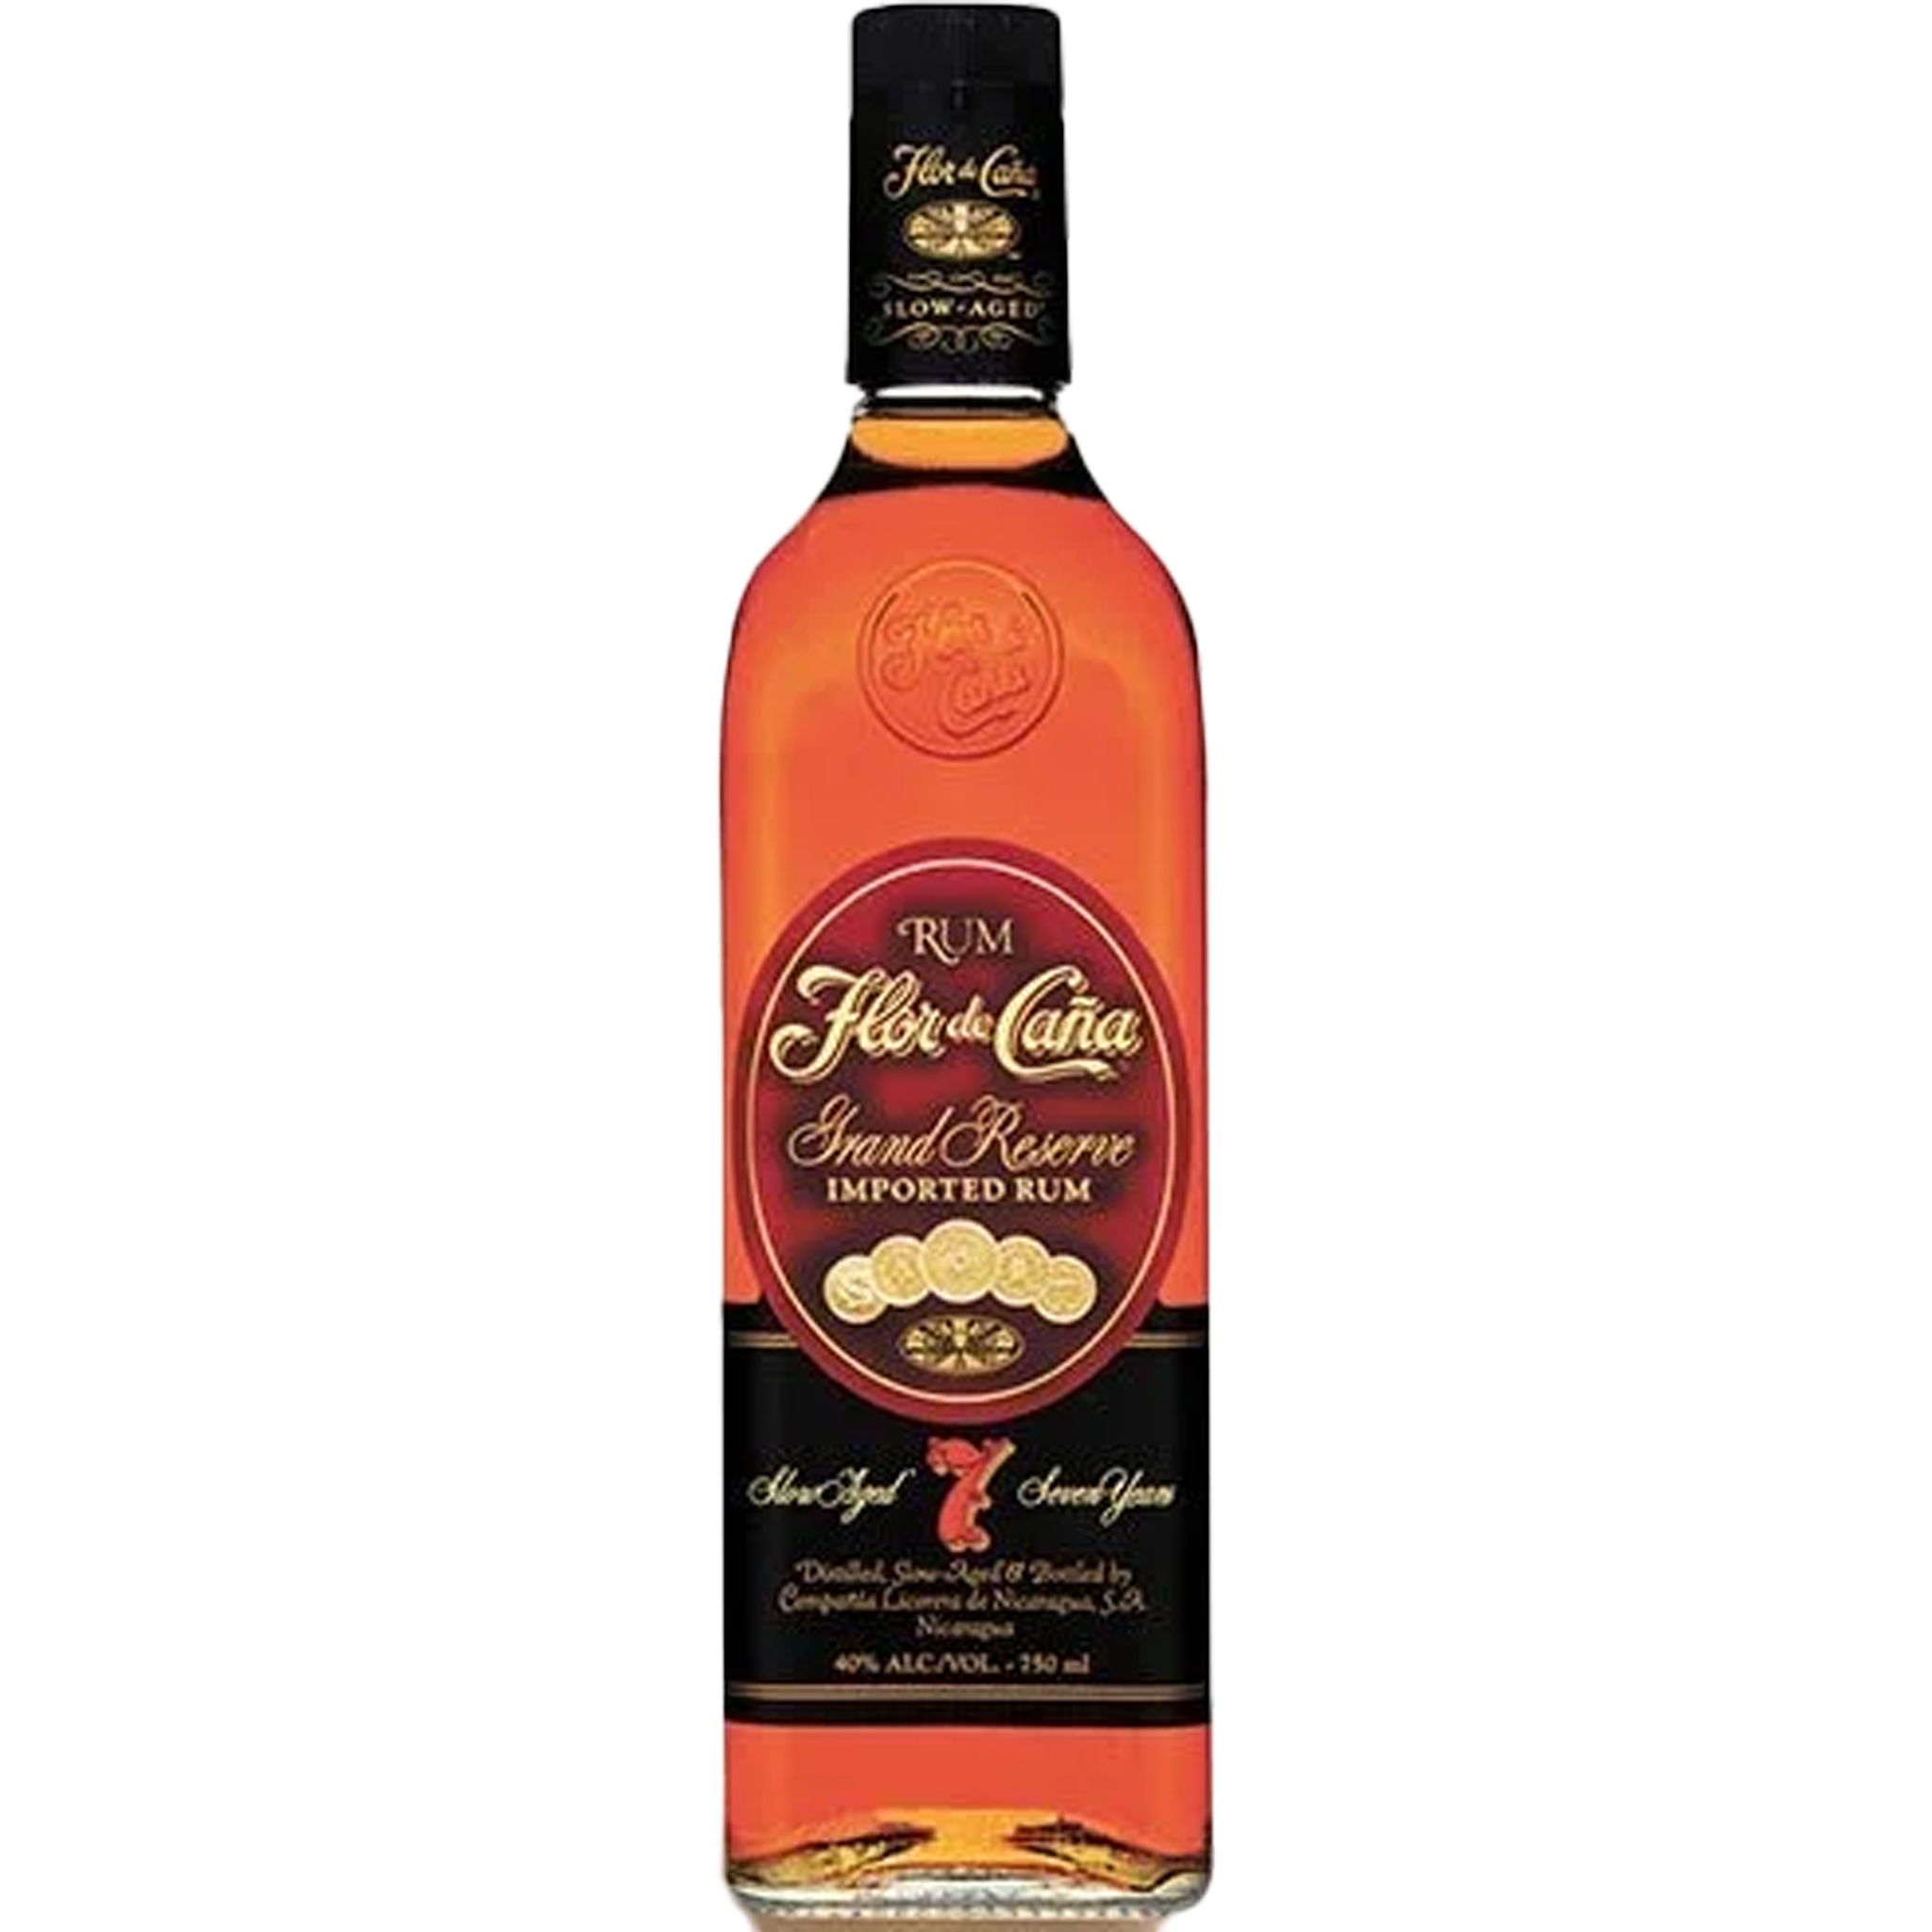 flordecana_grand_reserve_7YearOld